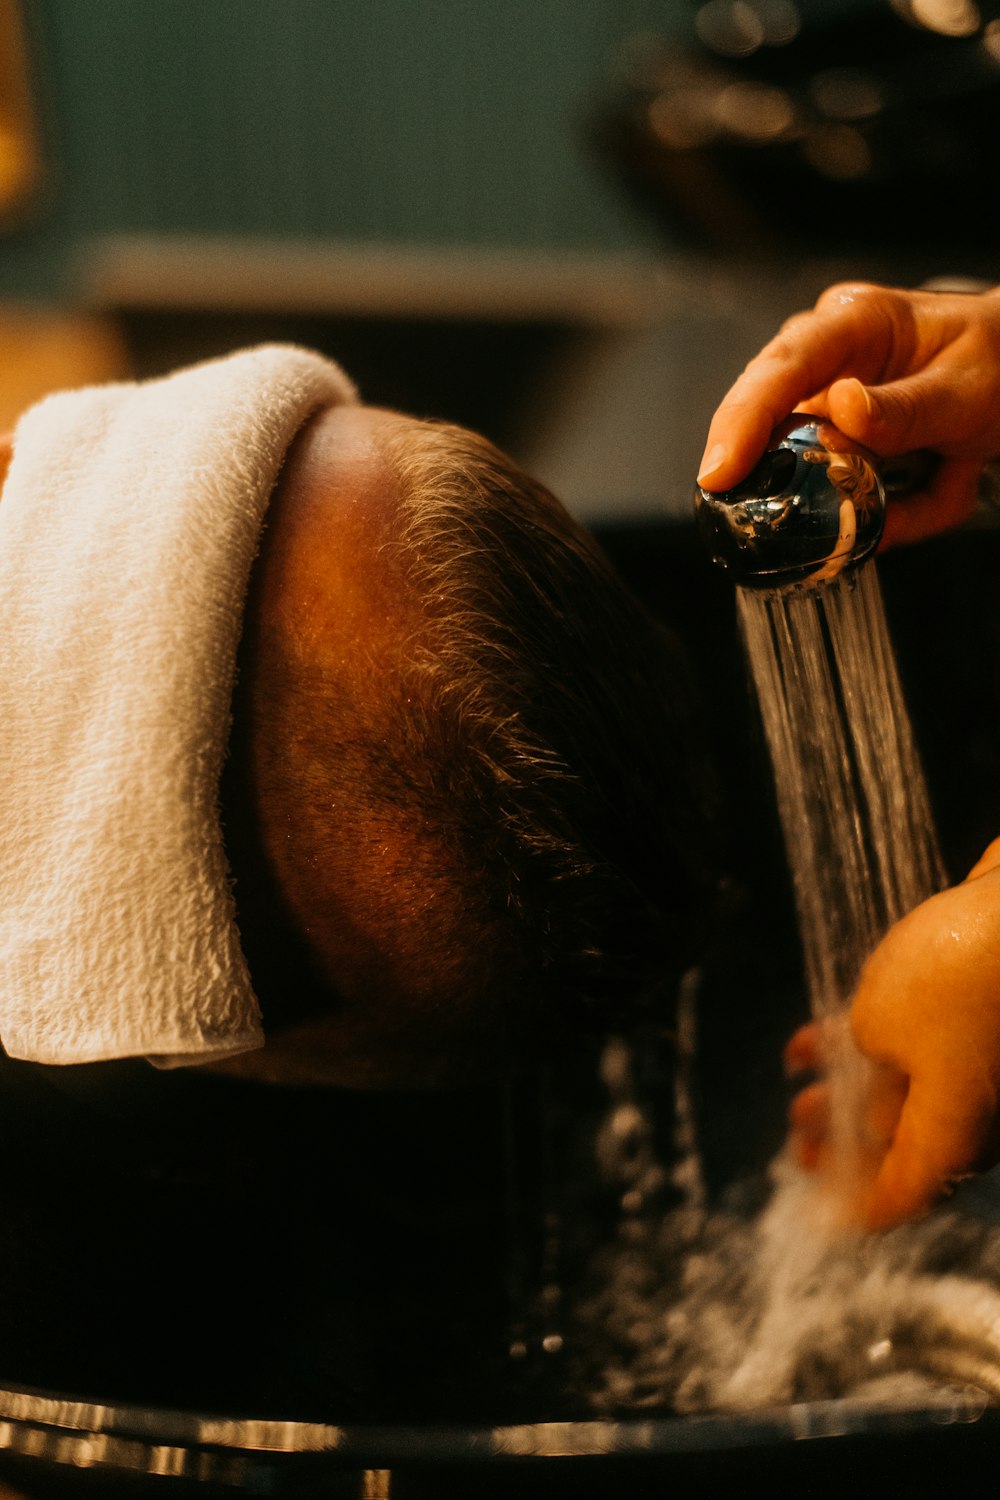 a man getting his hair washed in a sink